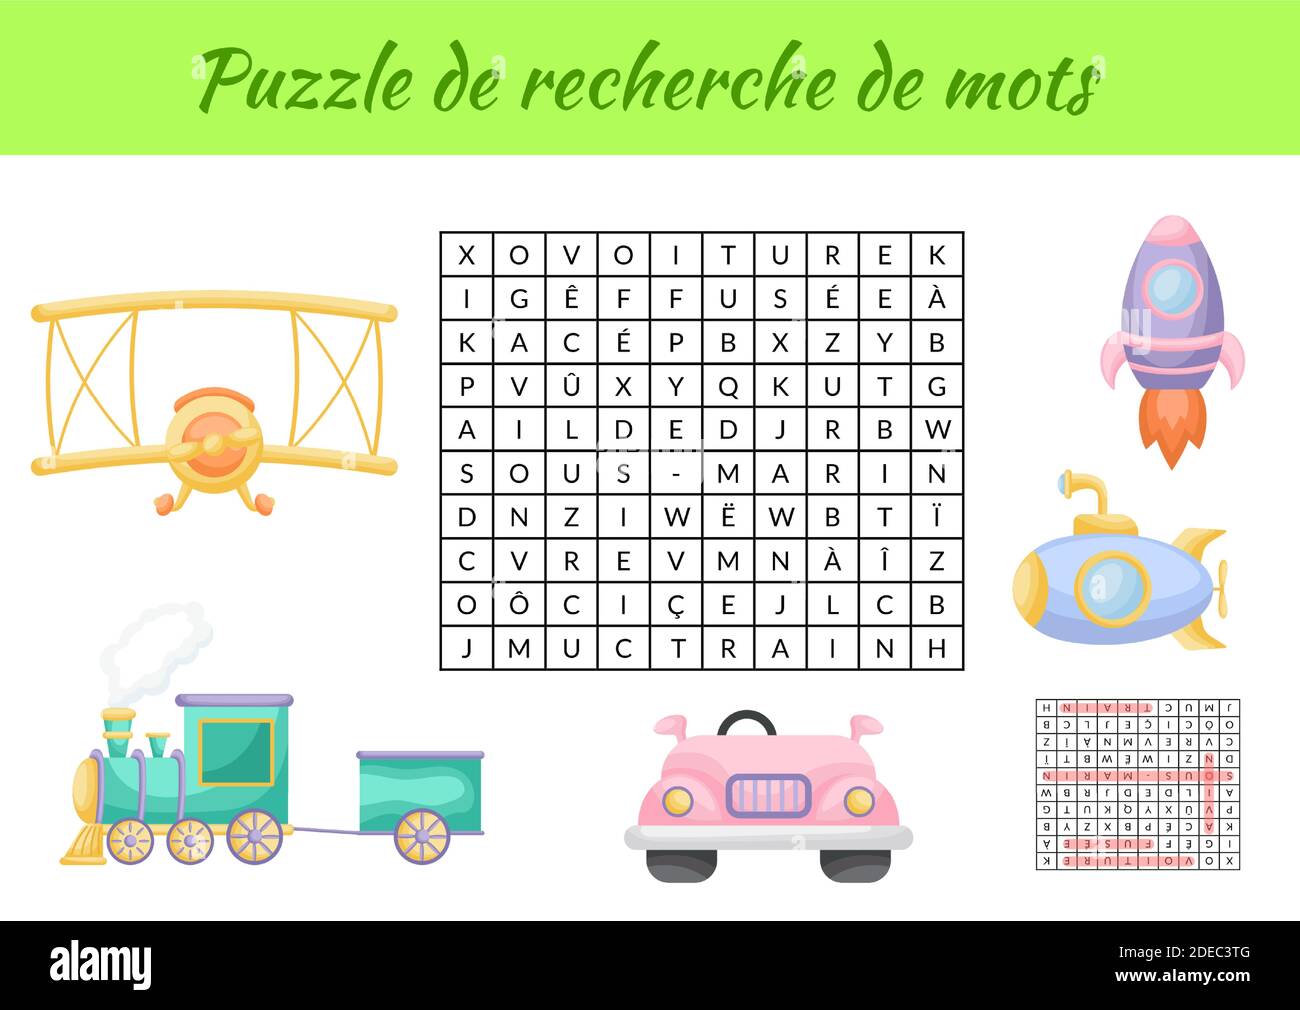 Puzzle De Recherche De Mots Word Search Puzzle With Pictures Educational Game For Study French Words Kids Activity Worksheet Stock Vector Image Art Alamy